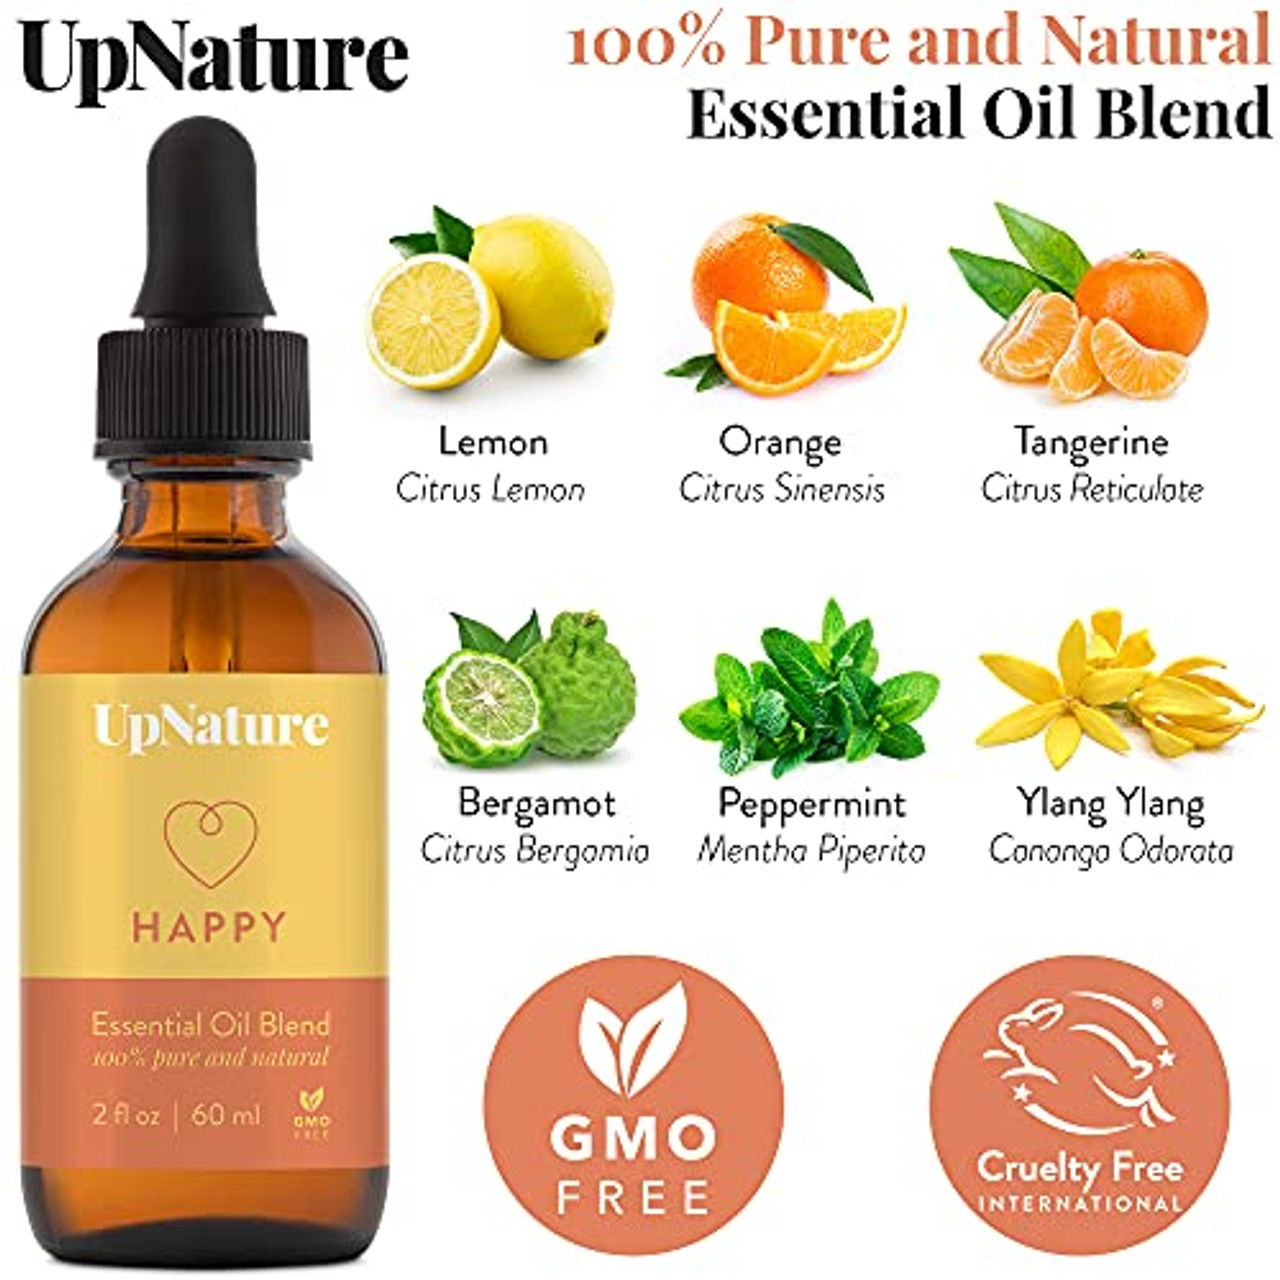 Happy Essential Oil Blend 2oz - Stress Relief, Mood Booster Citrus  Essential Oils with Peppermint Essential Oil